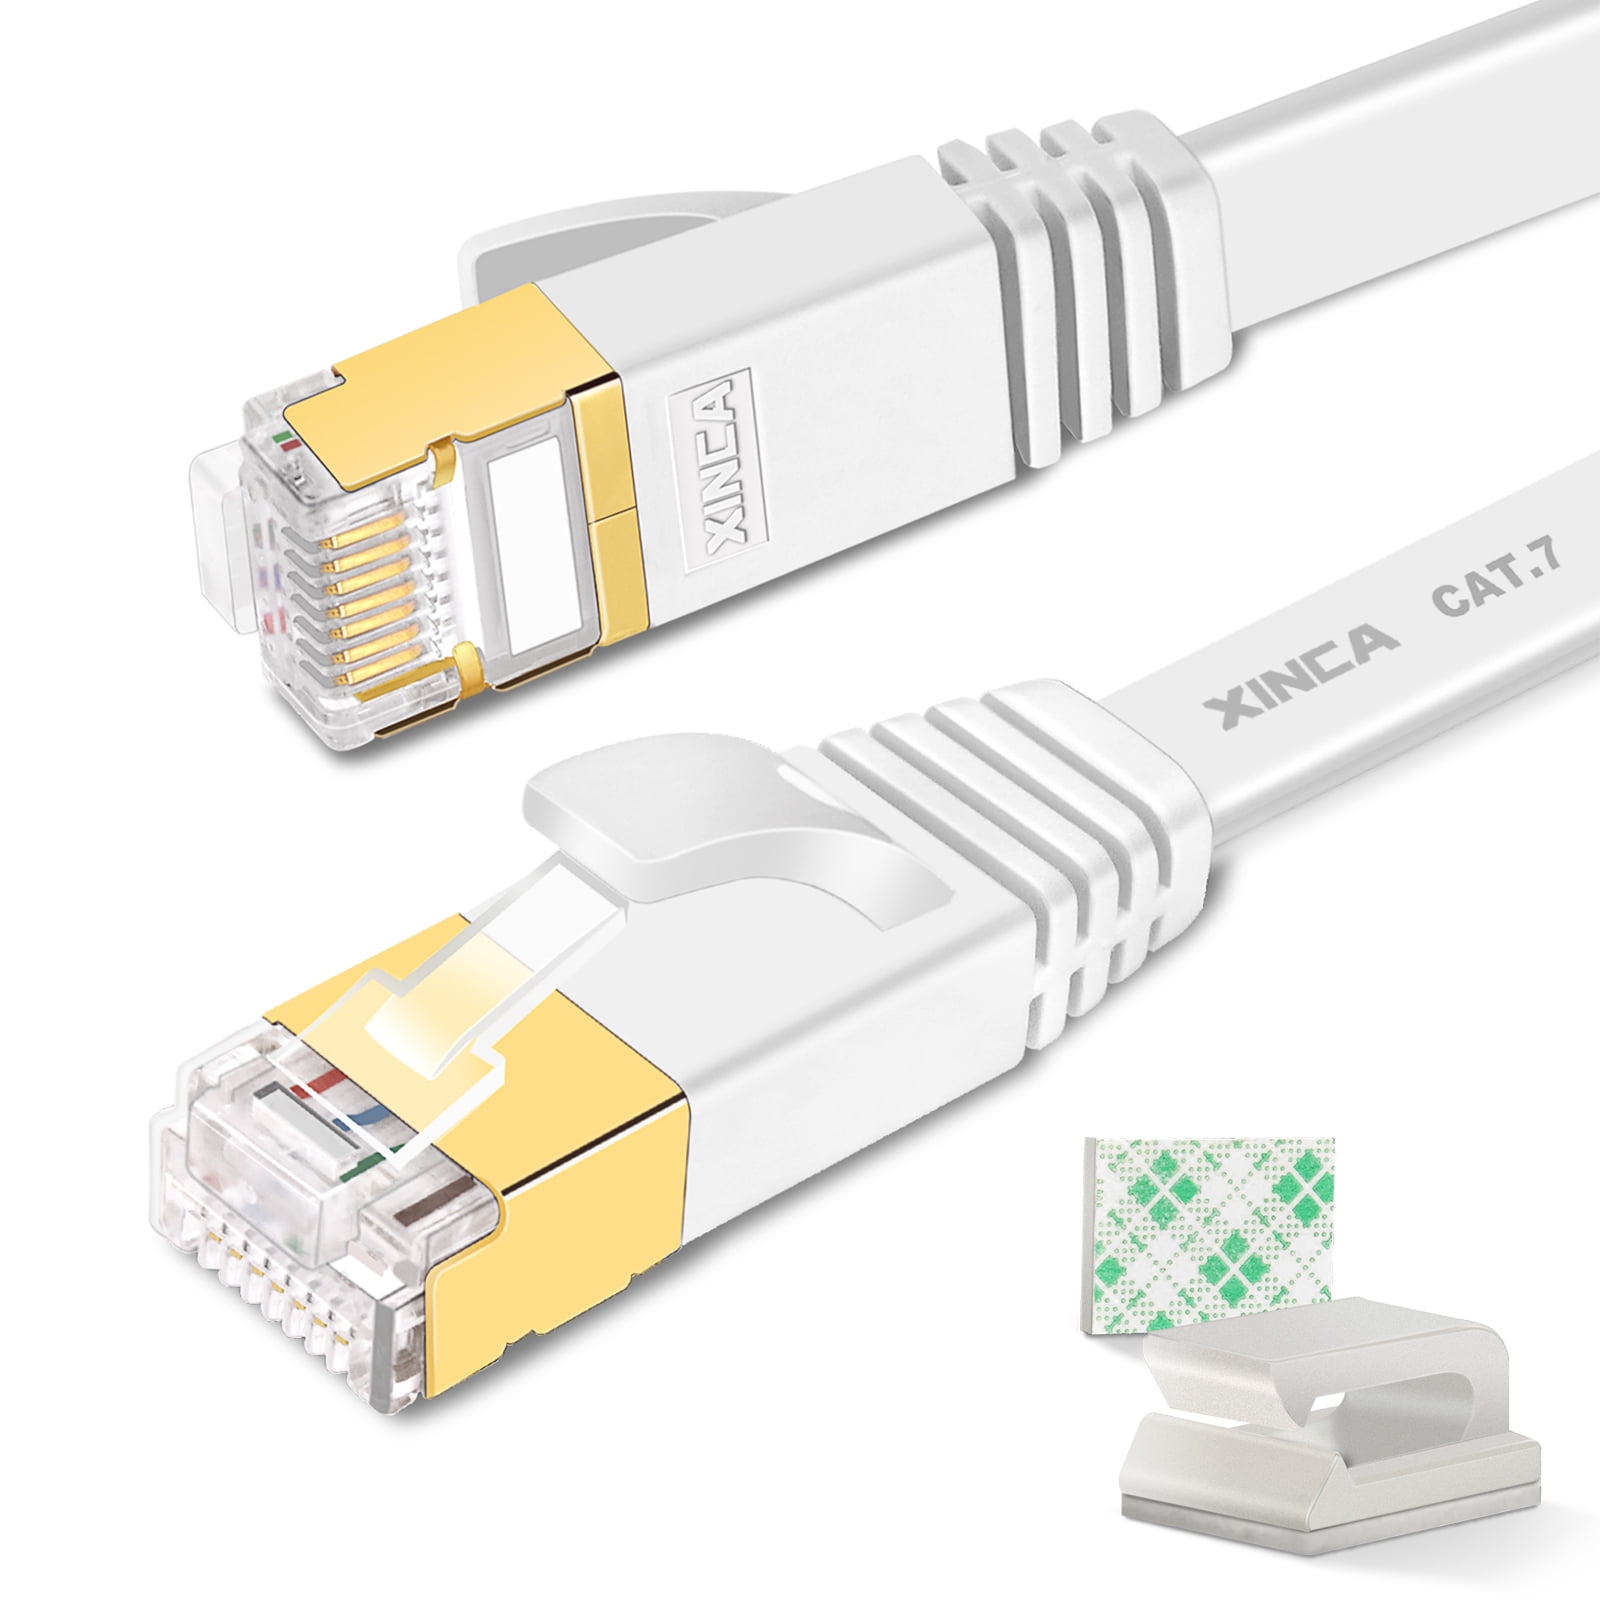 XINCA Cat7 Ethernet Cable Extra Long Lnternet Network Flat Patch